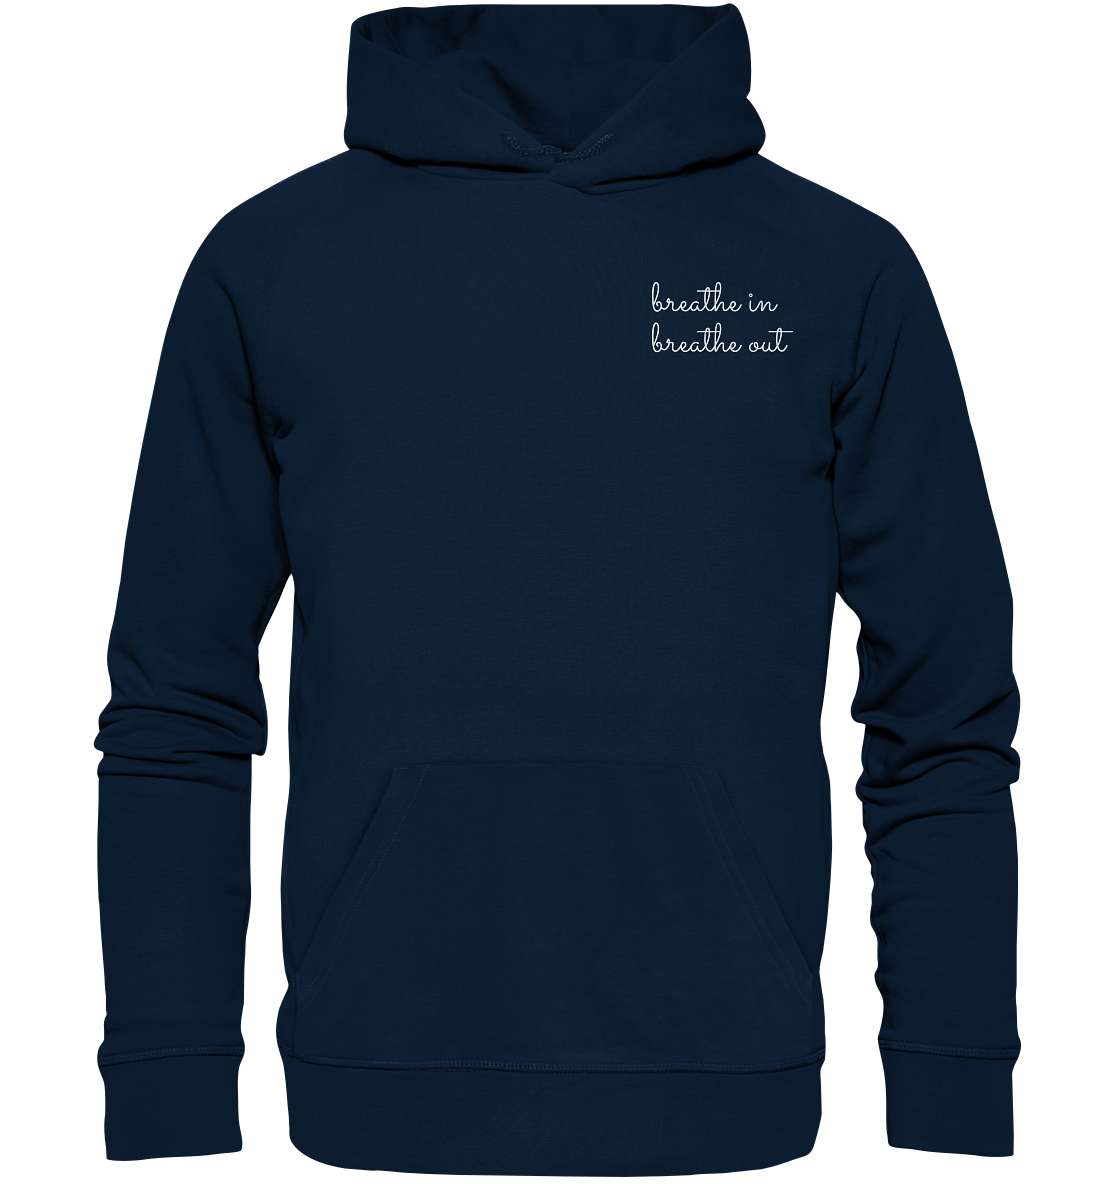 Breathe in breathe out - Organic Hoodie